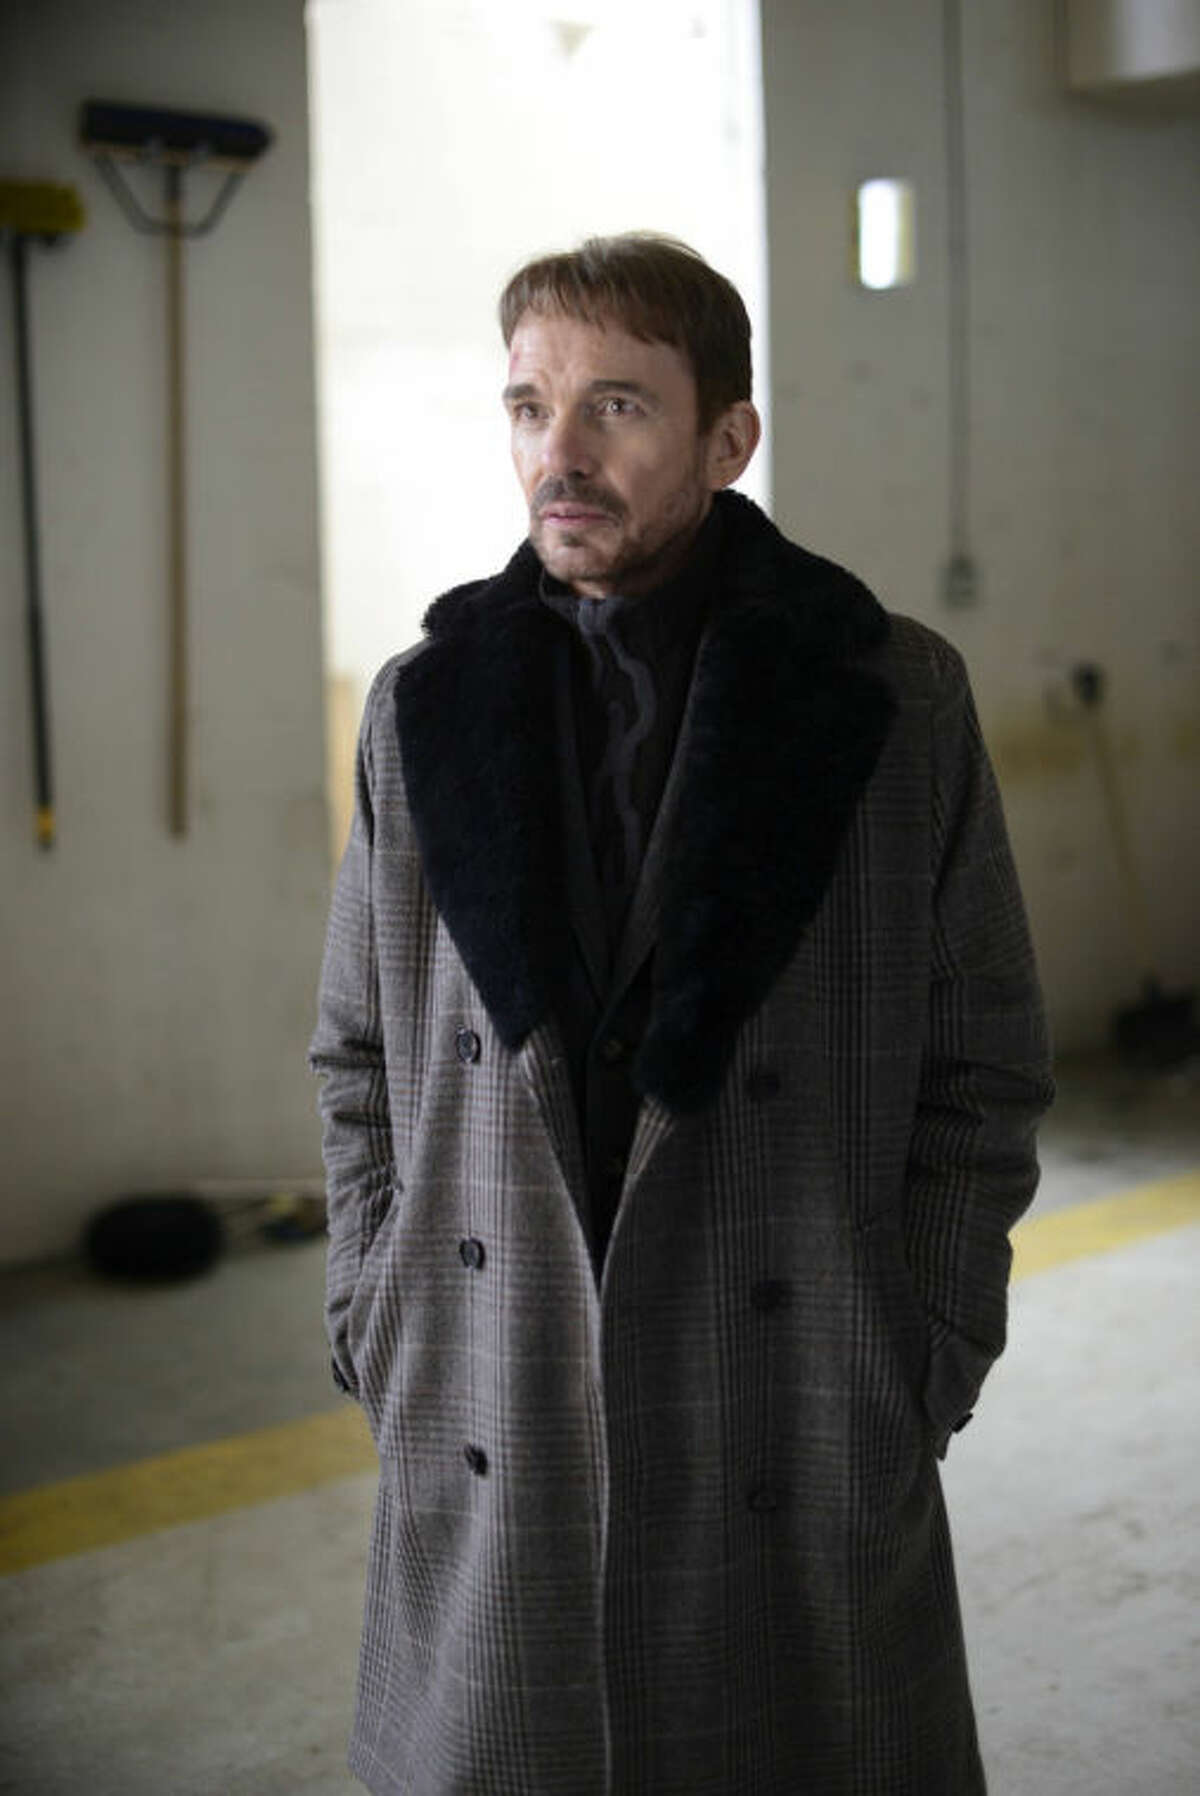 This image released by FX shows Billy Bob Thornton as Lorne Malvo in a scene from "Fargo." The 10-episode season premieres Tuesday at 10 p.m. EDT on FX. (AP Photo/FX, Chris Large)